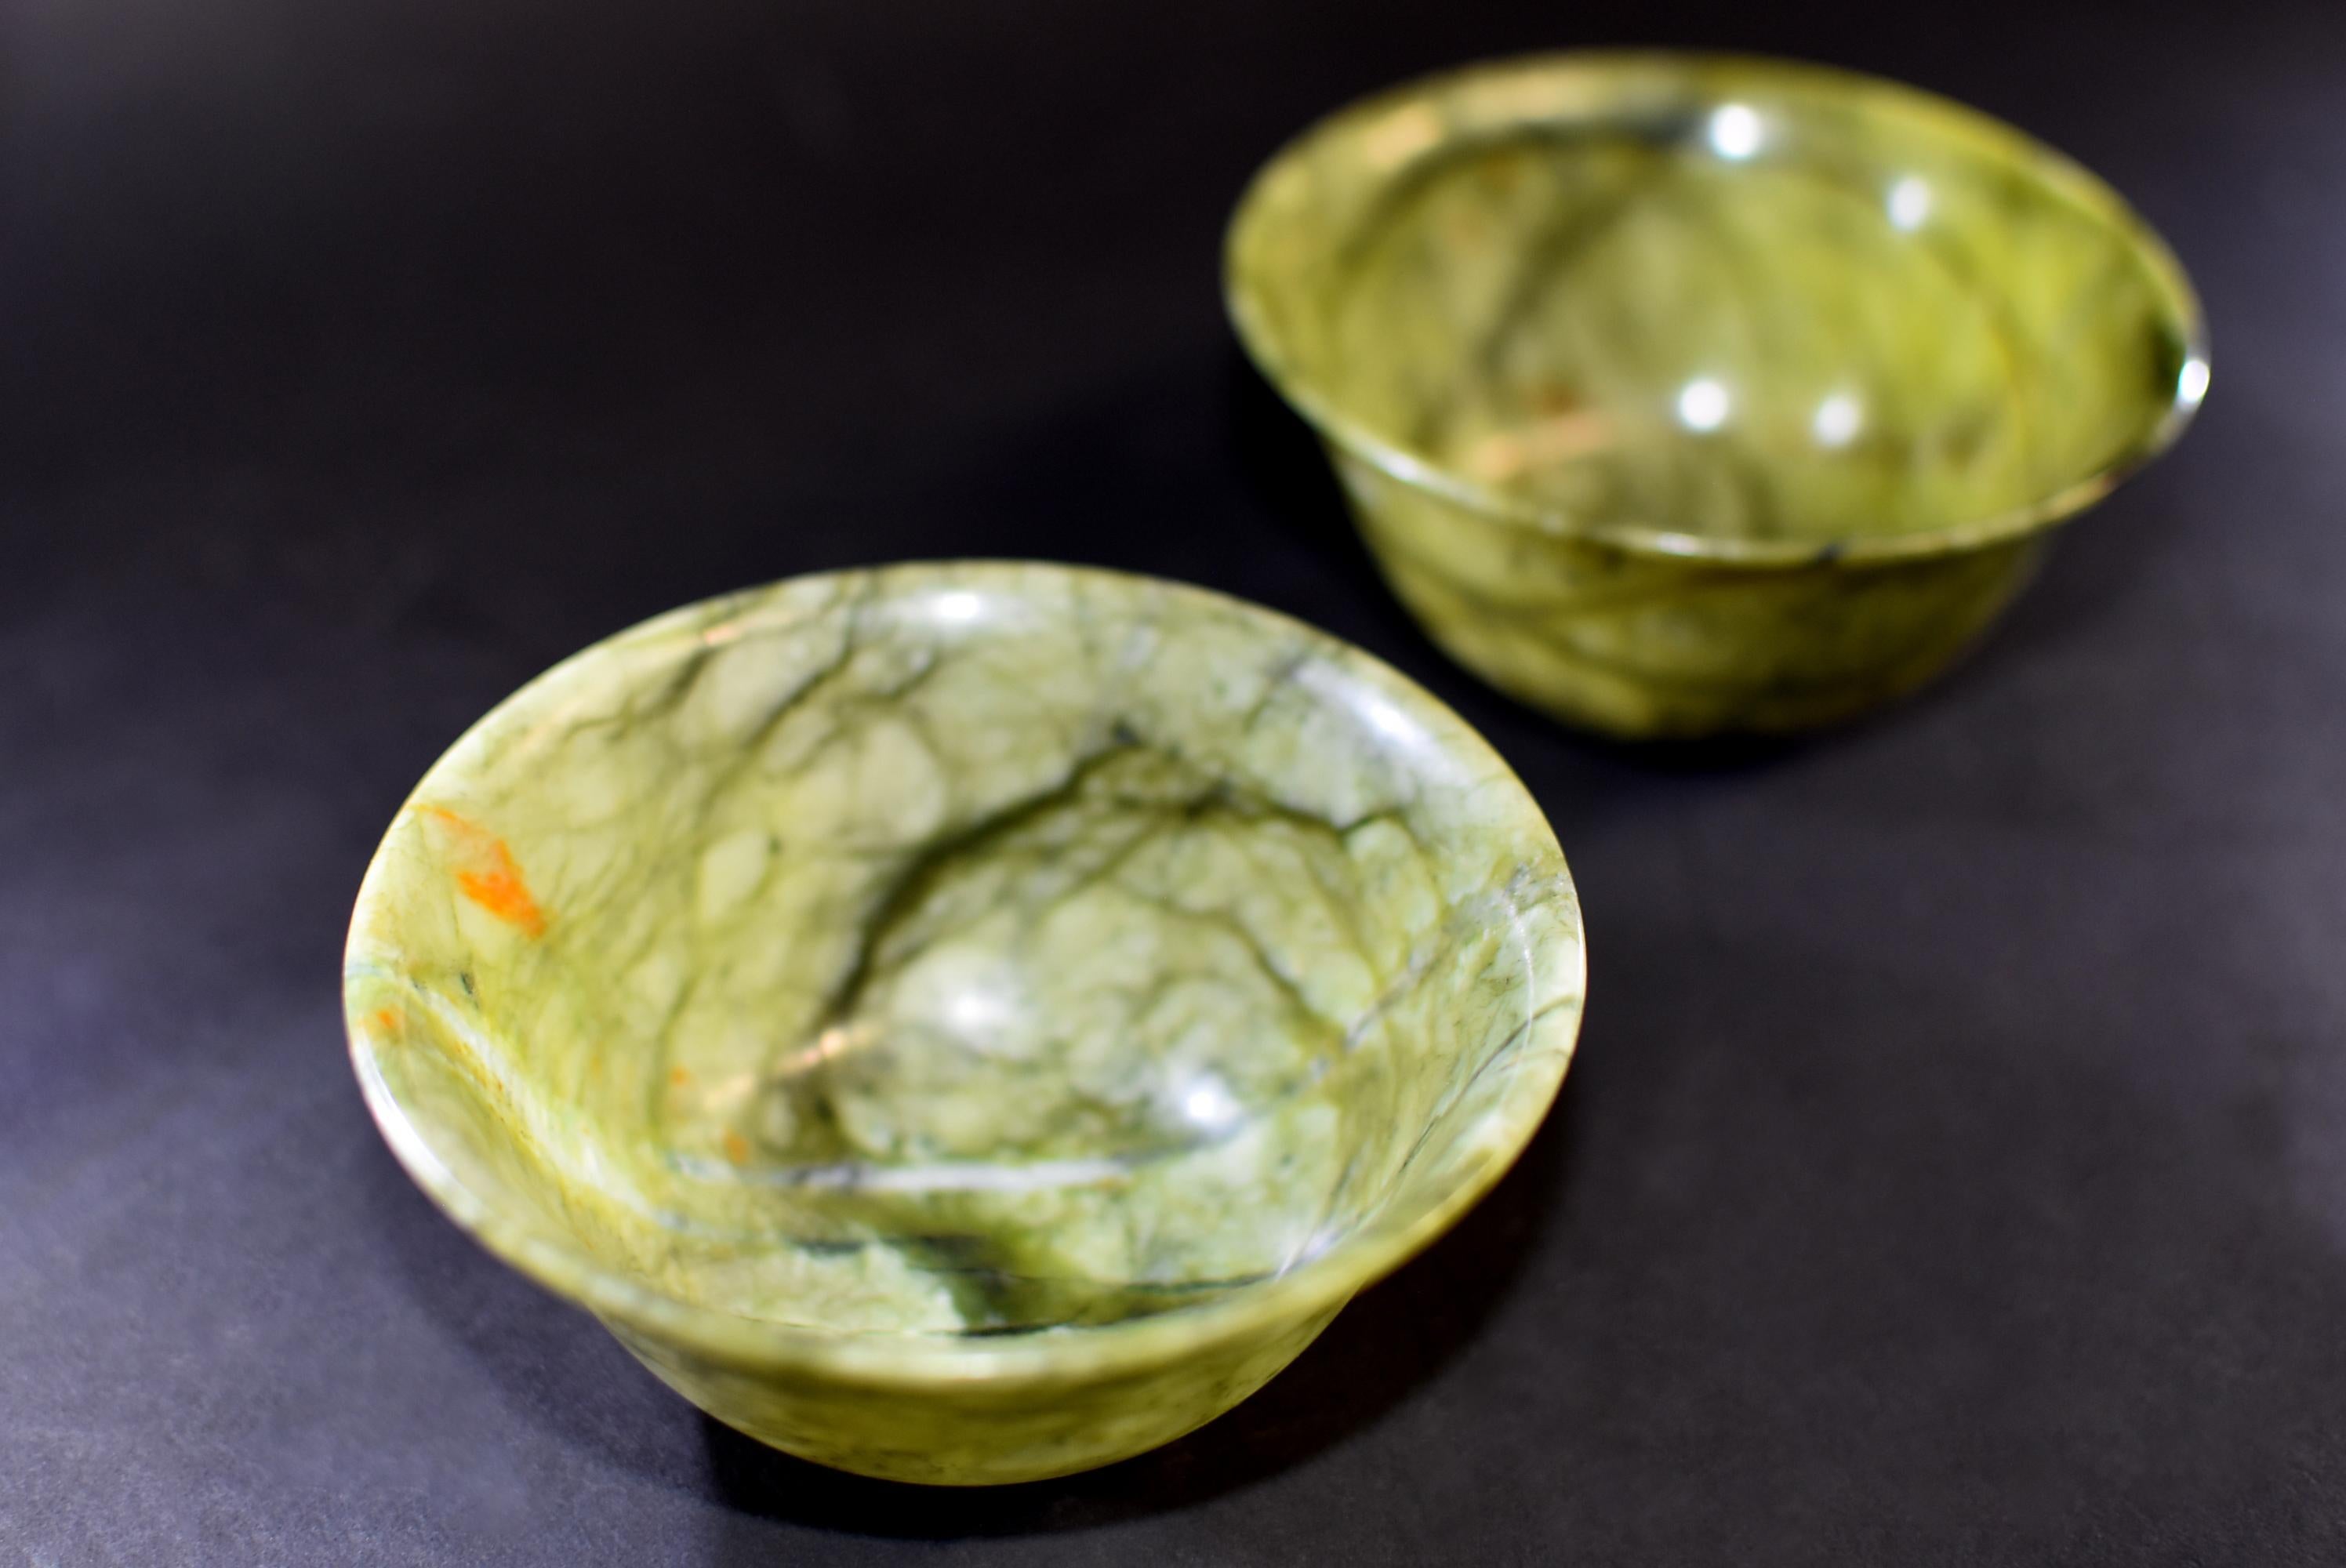 Pair of Serpentine Bowls Heaven and Earth 1